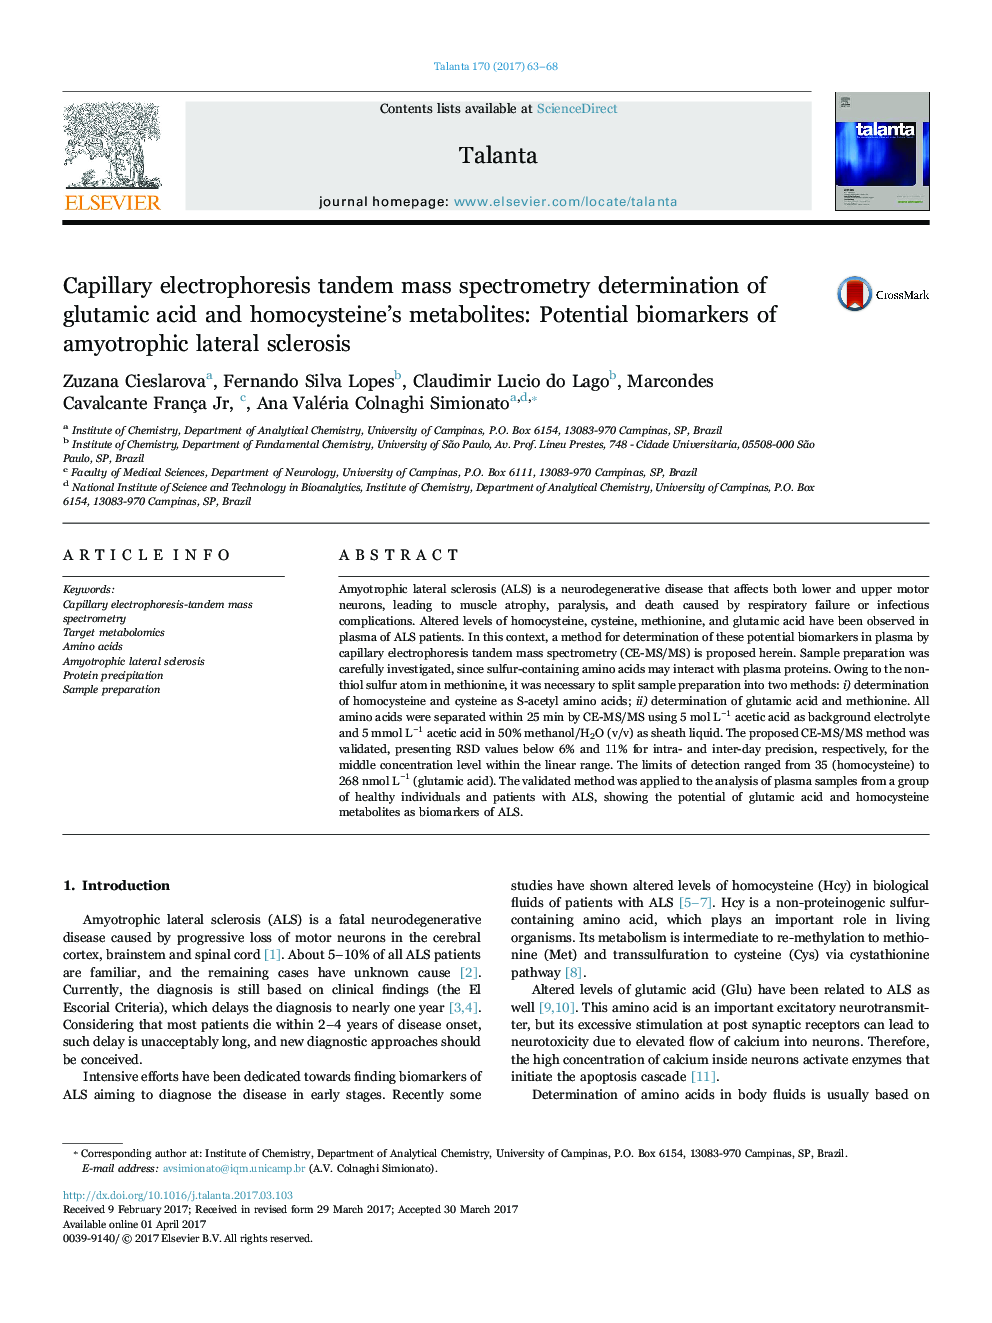 Capillary electrophoresis tandem mass spectrometry determination of glutamic acid and homocysteine's metabolites: Potential biomarkers of amyotrophic lateral sclerosis